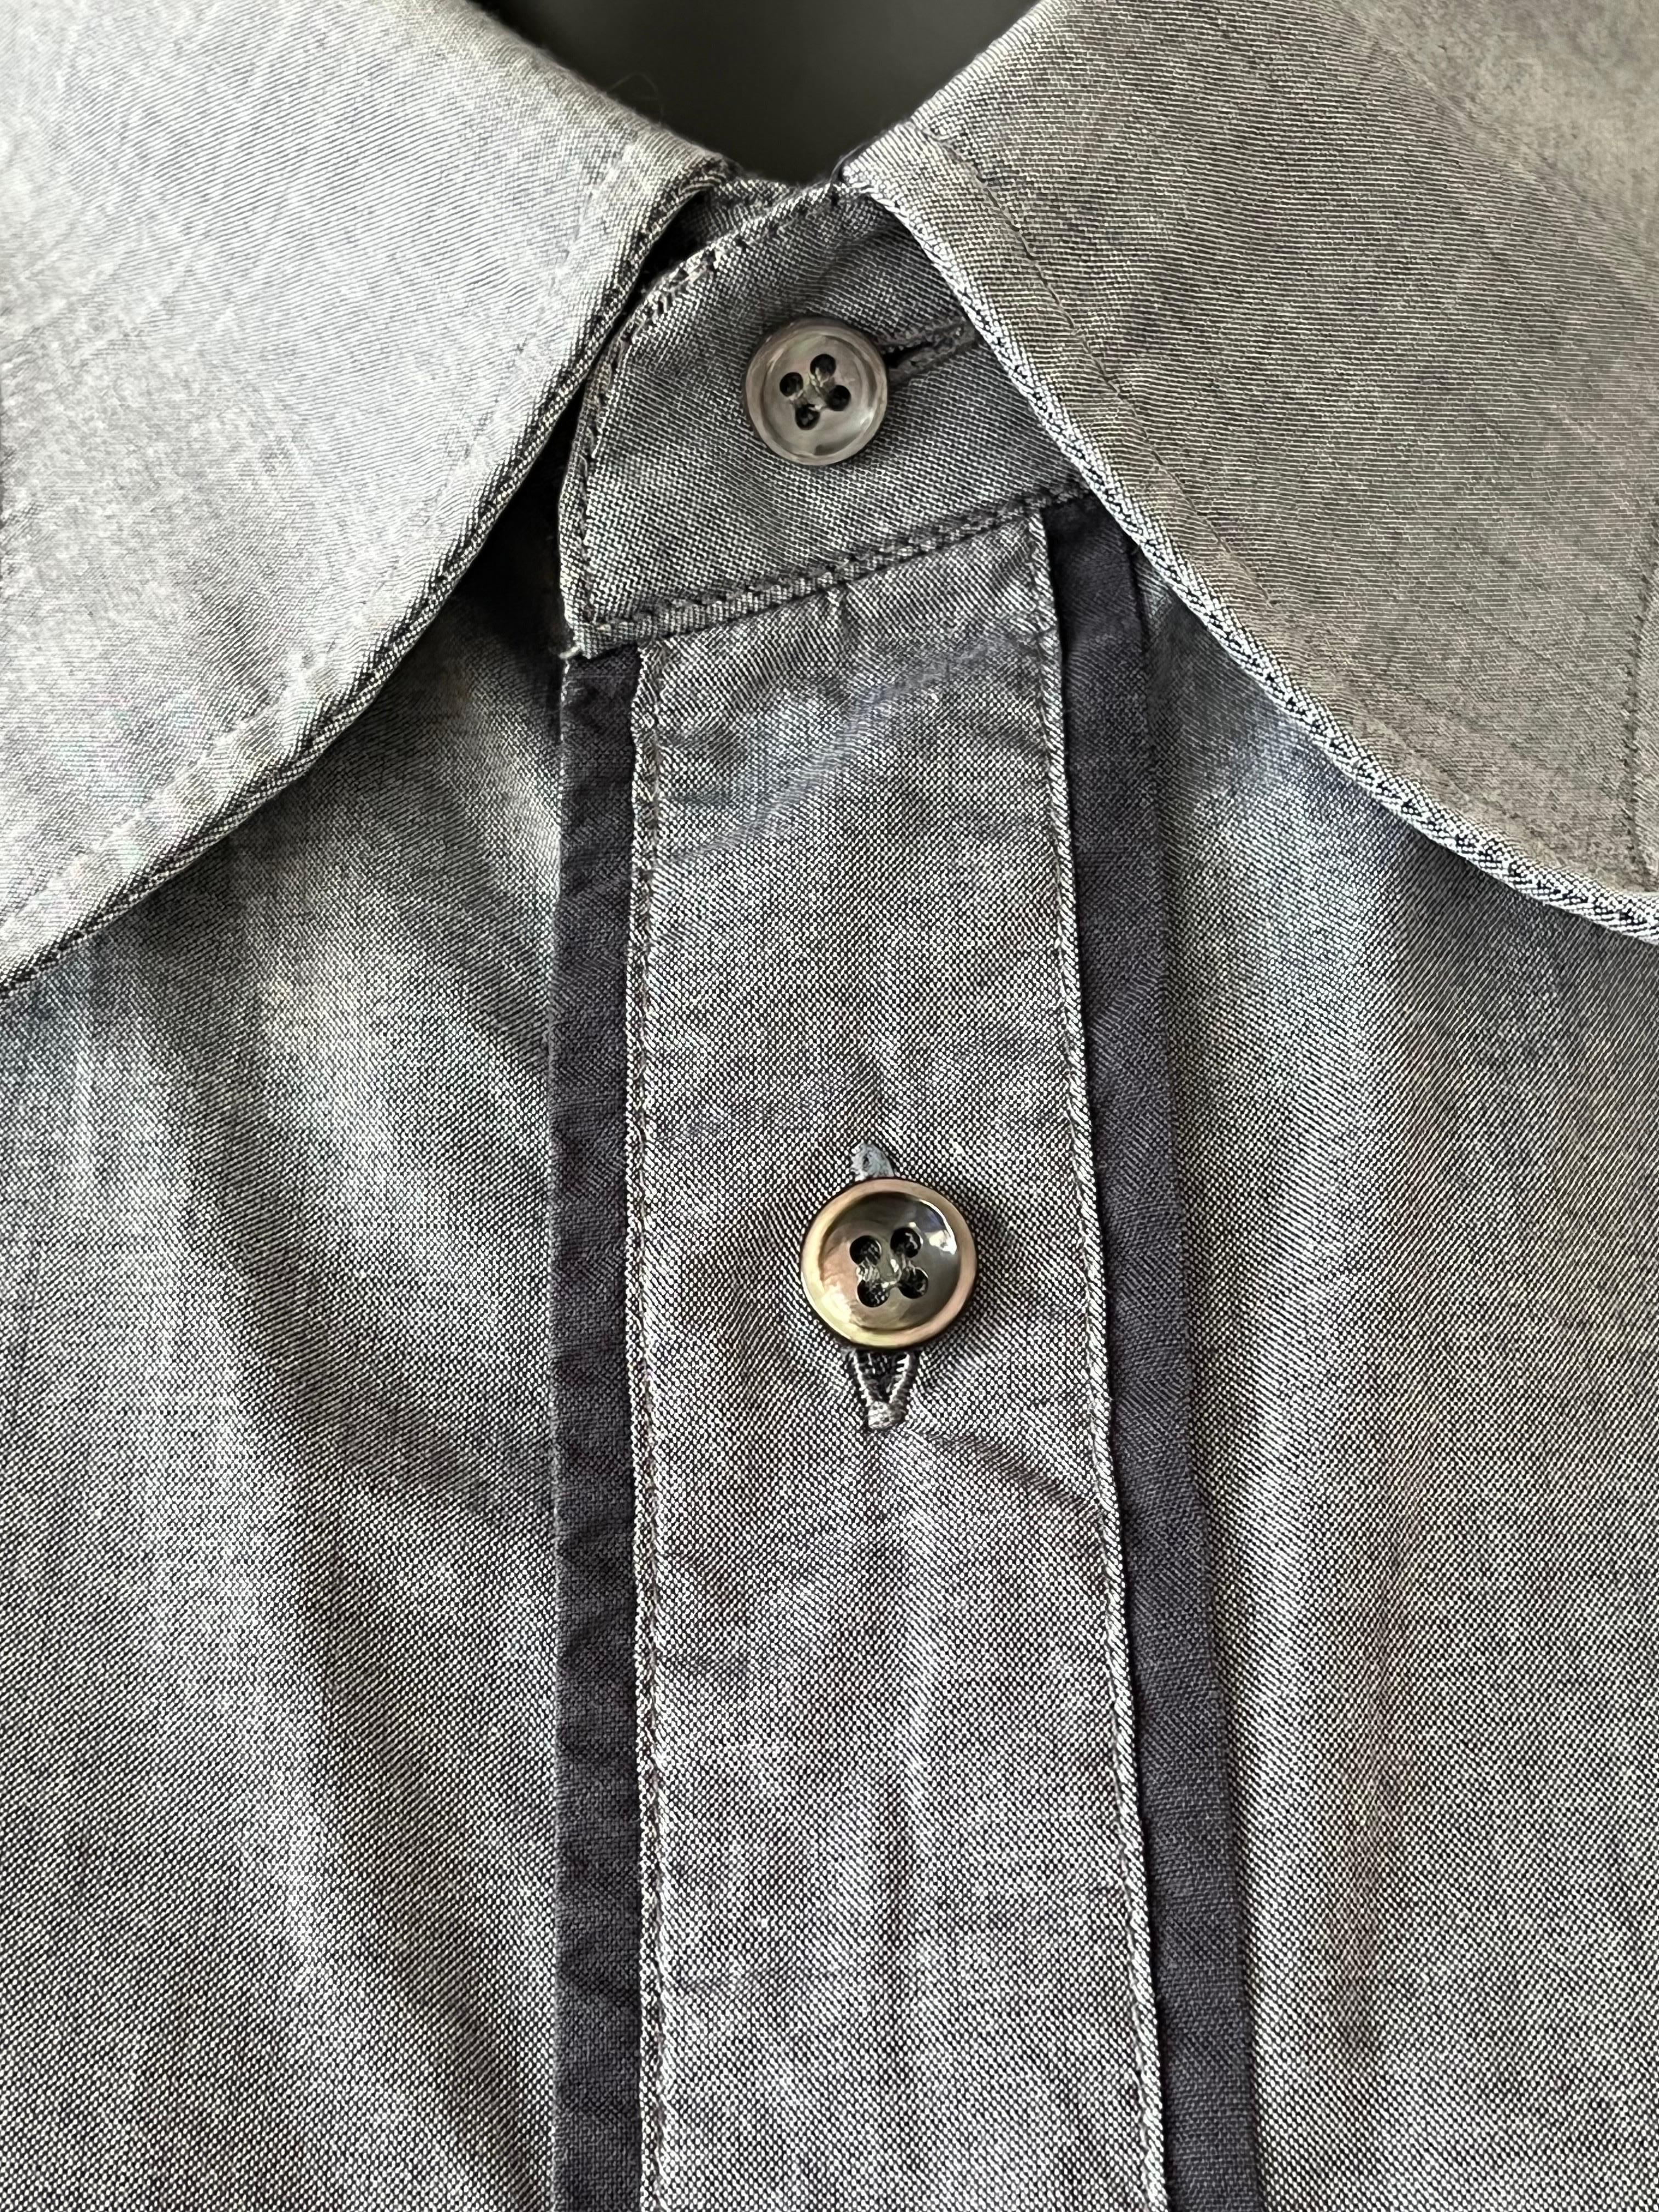 Maison Martin Margiela Men's Shirt in pale grey and contrast black binding. Iconic item in great condition.